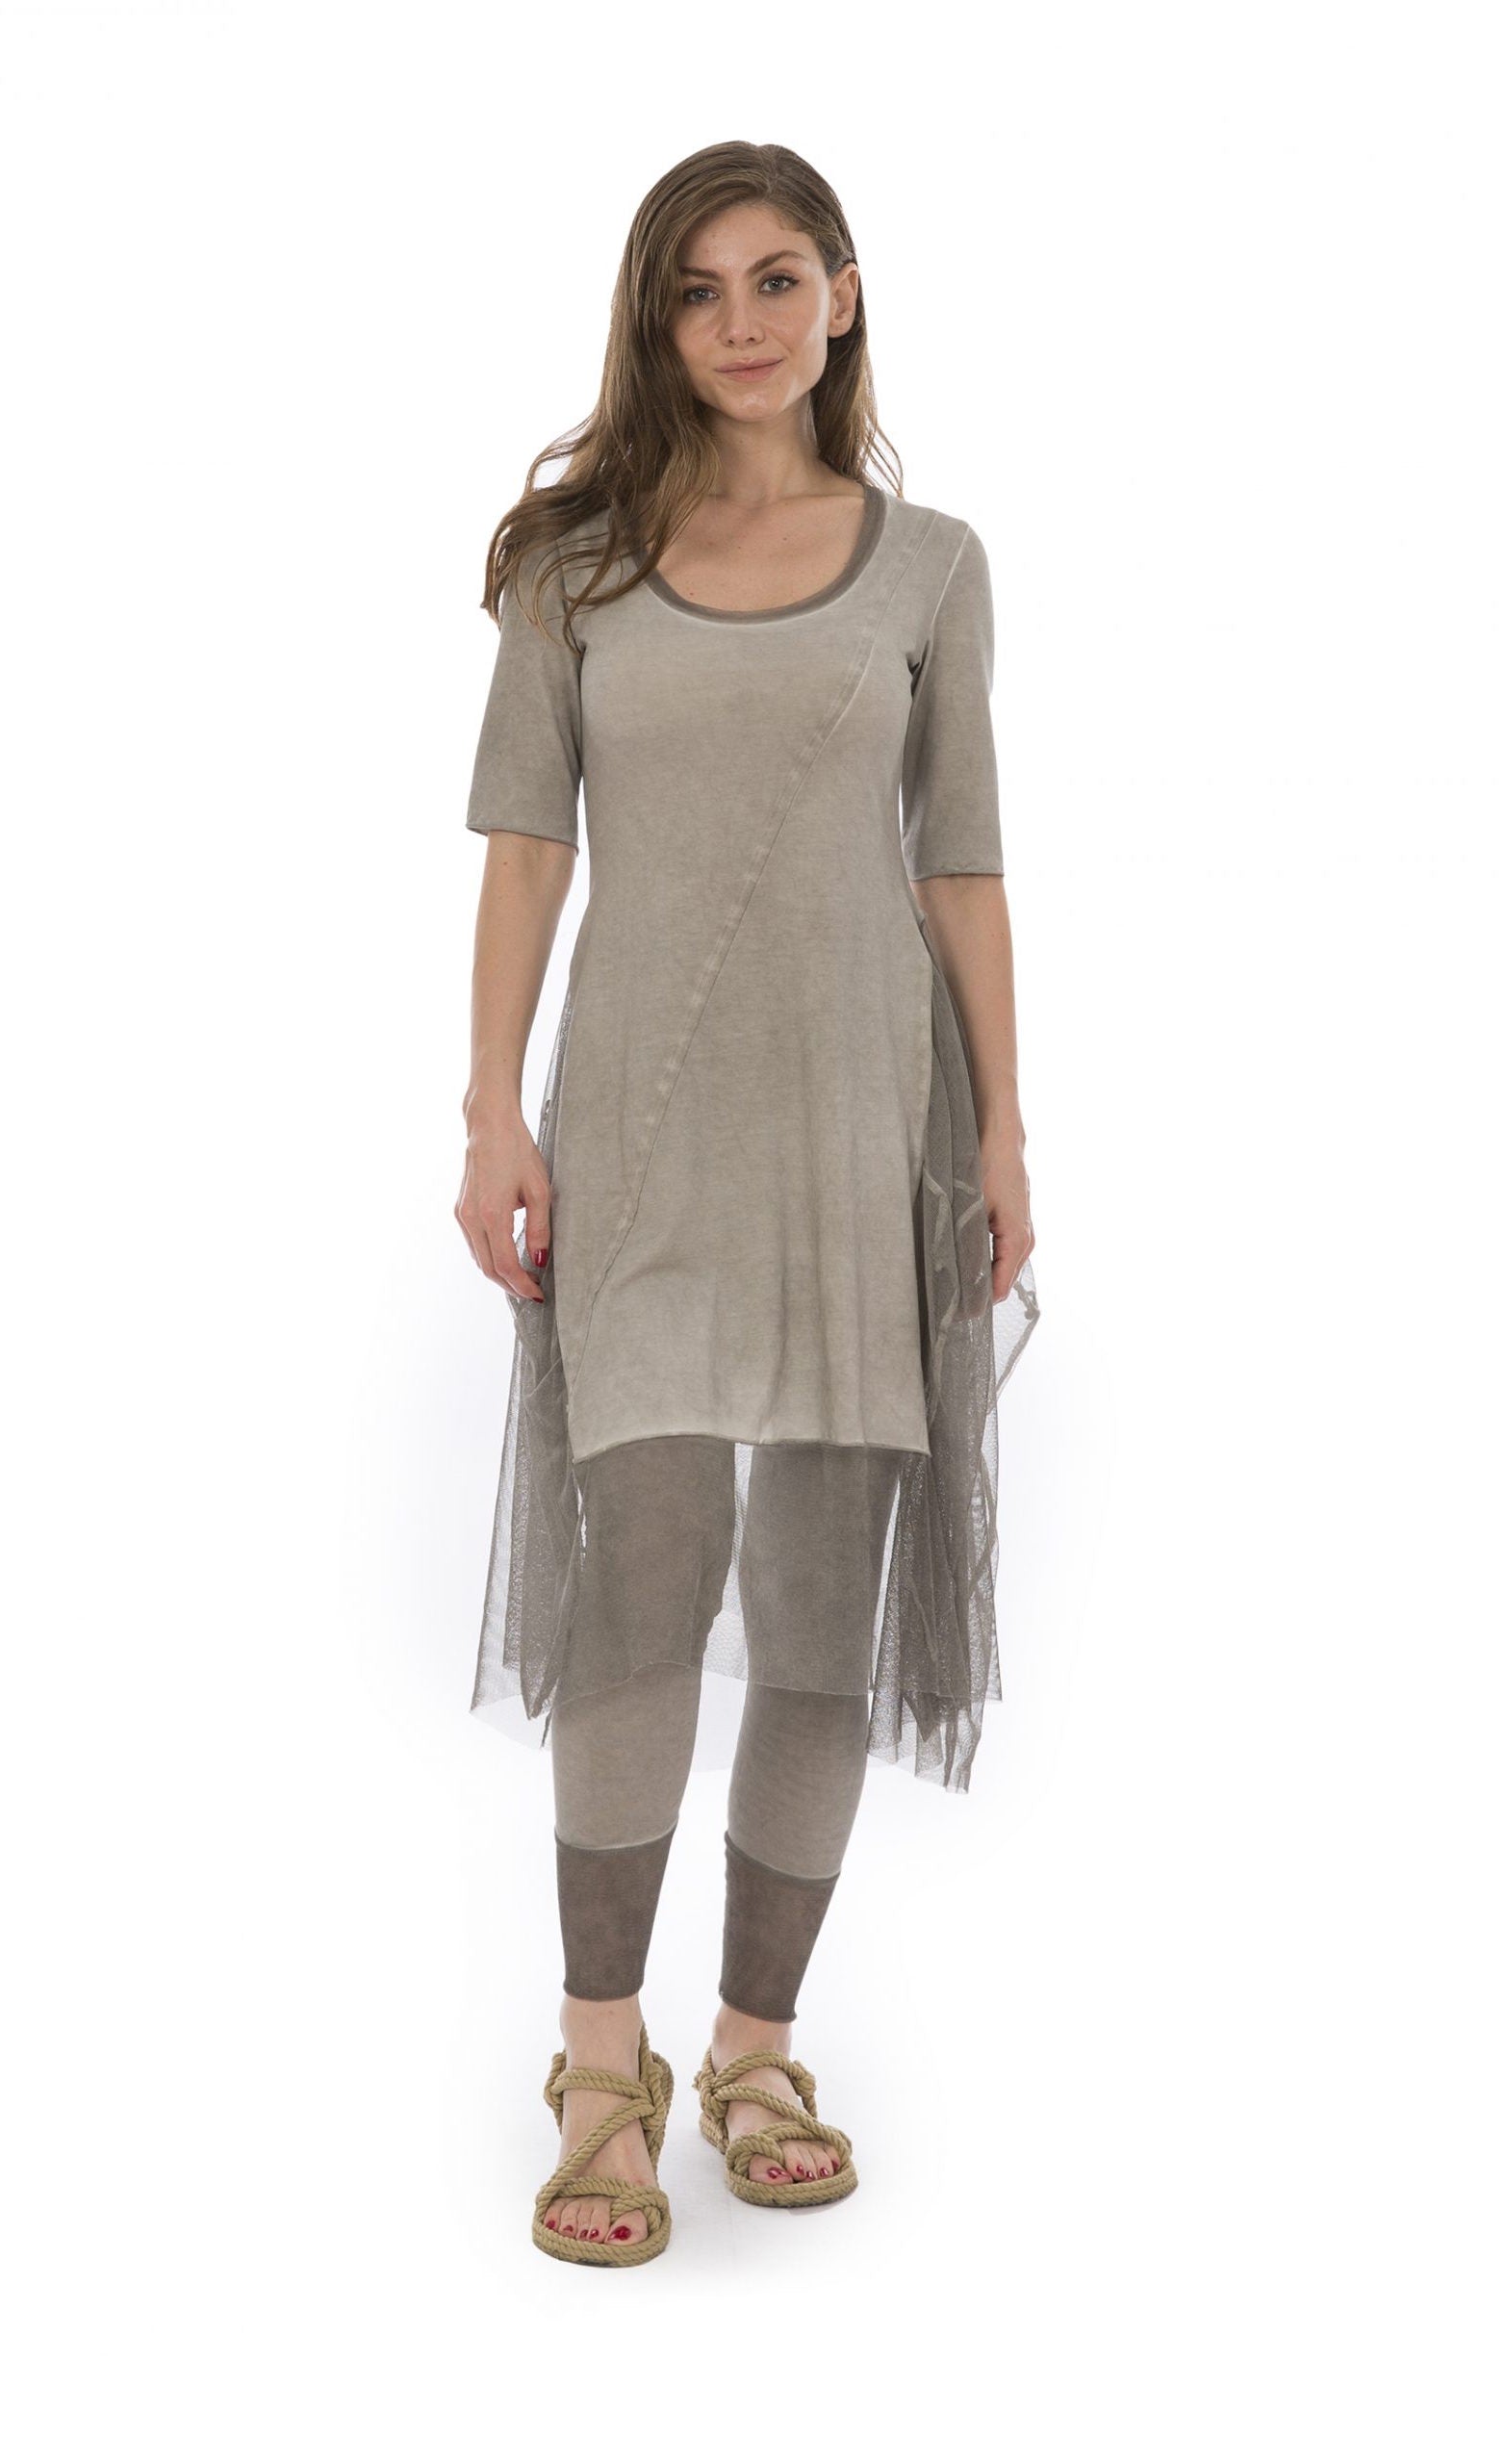 Front full body view of a woman wearing the luukaa stone leggings in the color beige. They have mesh trim on the bottom. On the top the model is wearing the luukaa tunic in beige.